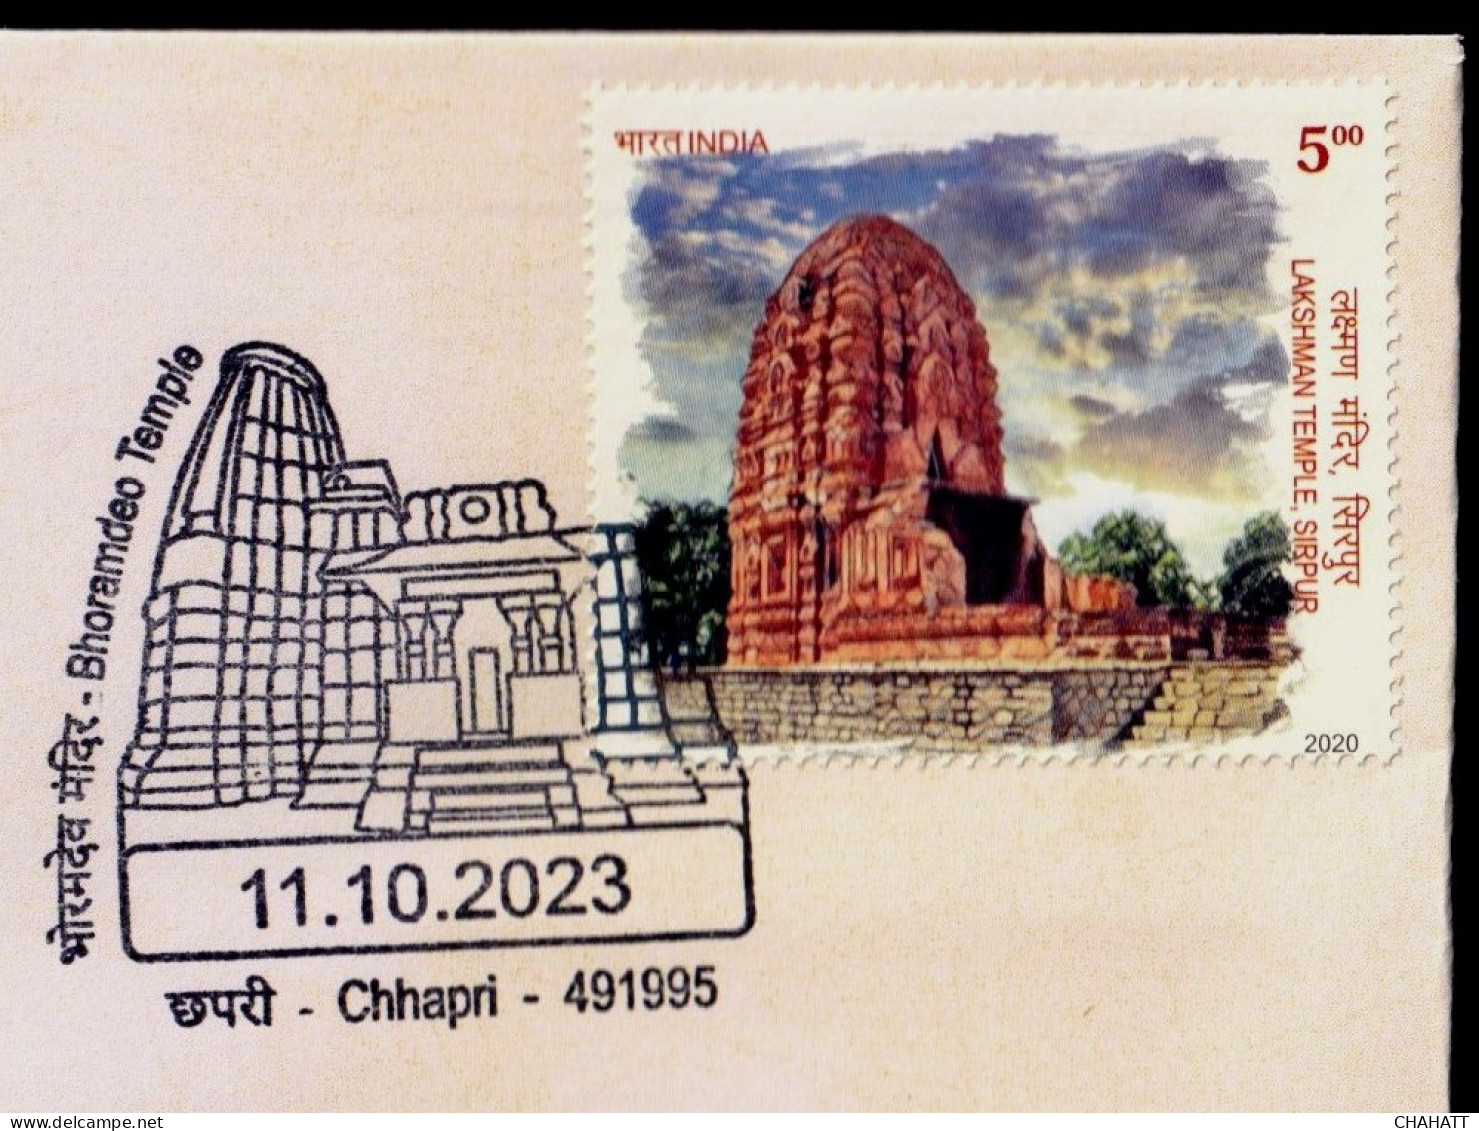 HINDUISM- BHORAMDEO TEMPLE- PERMANENT CACHET- INDIA POST, RAIPUR GPO-CG CIRCLE-LIMITED ISSUE-BX4-29 - Hindouisme